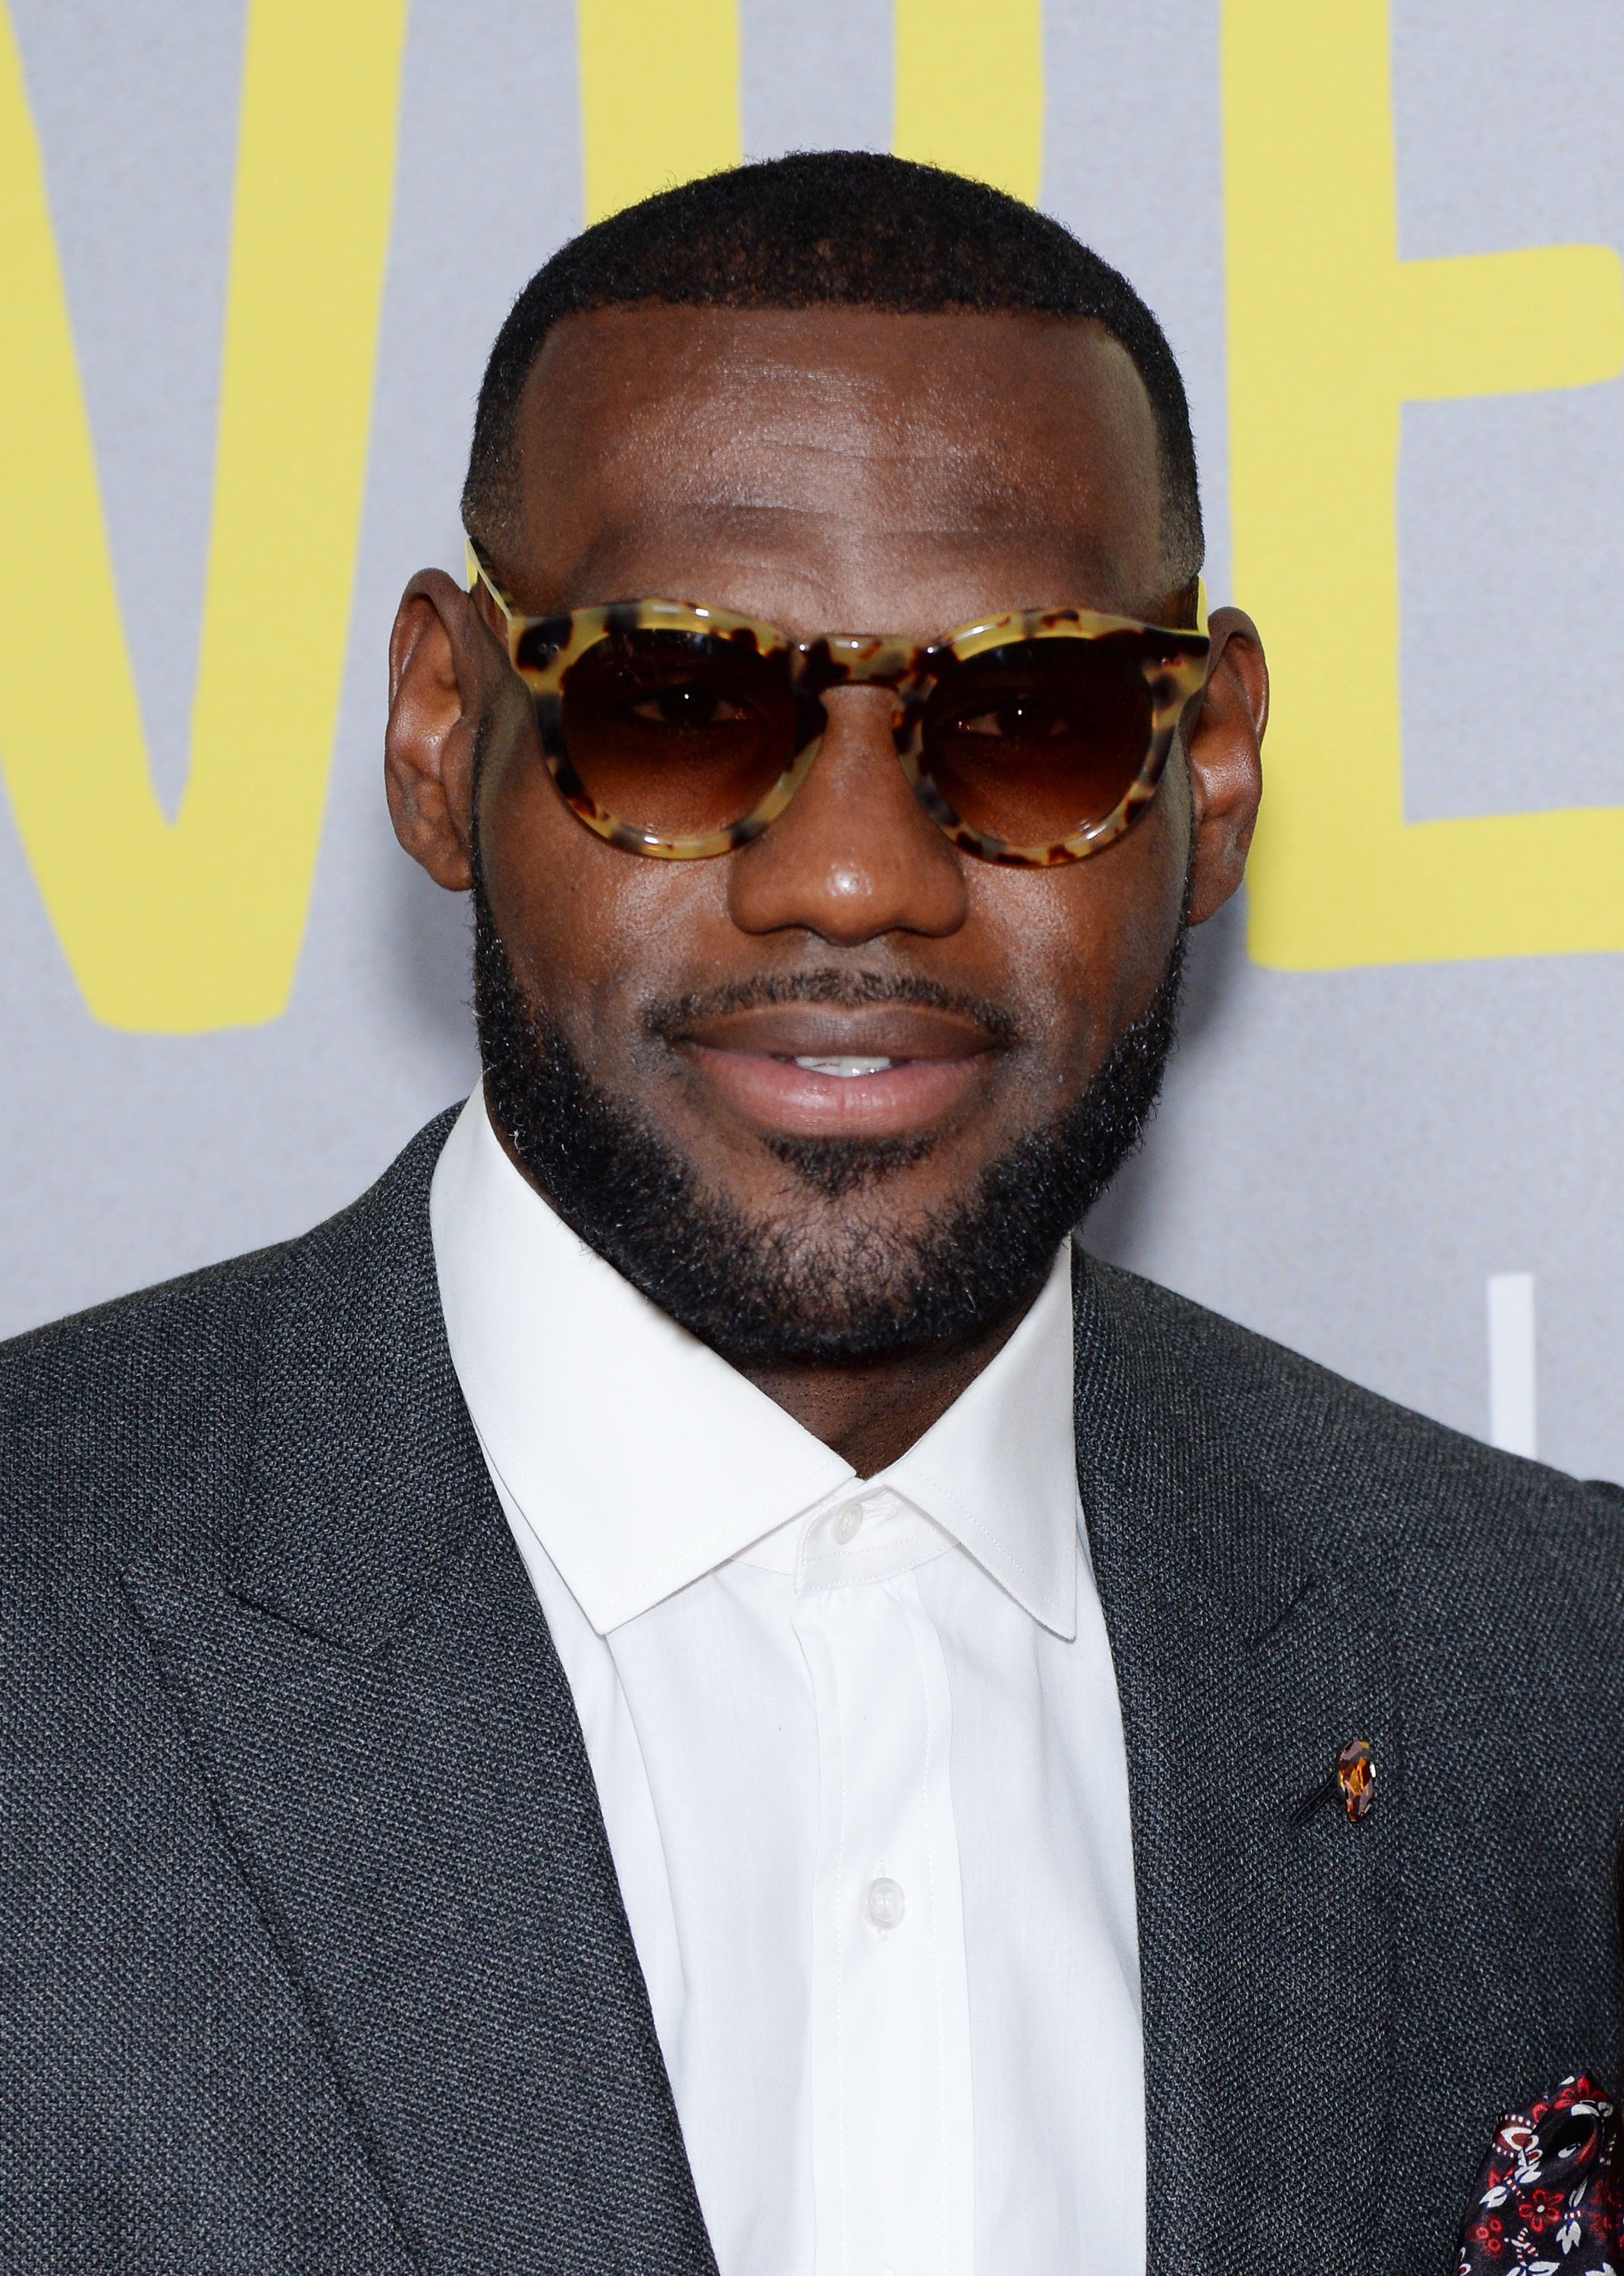 LeBron James attends the 'Trainwreck' premiere on July 14, 2015 in New York City.